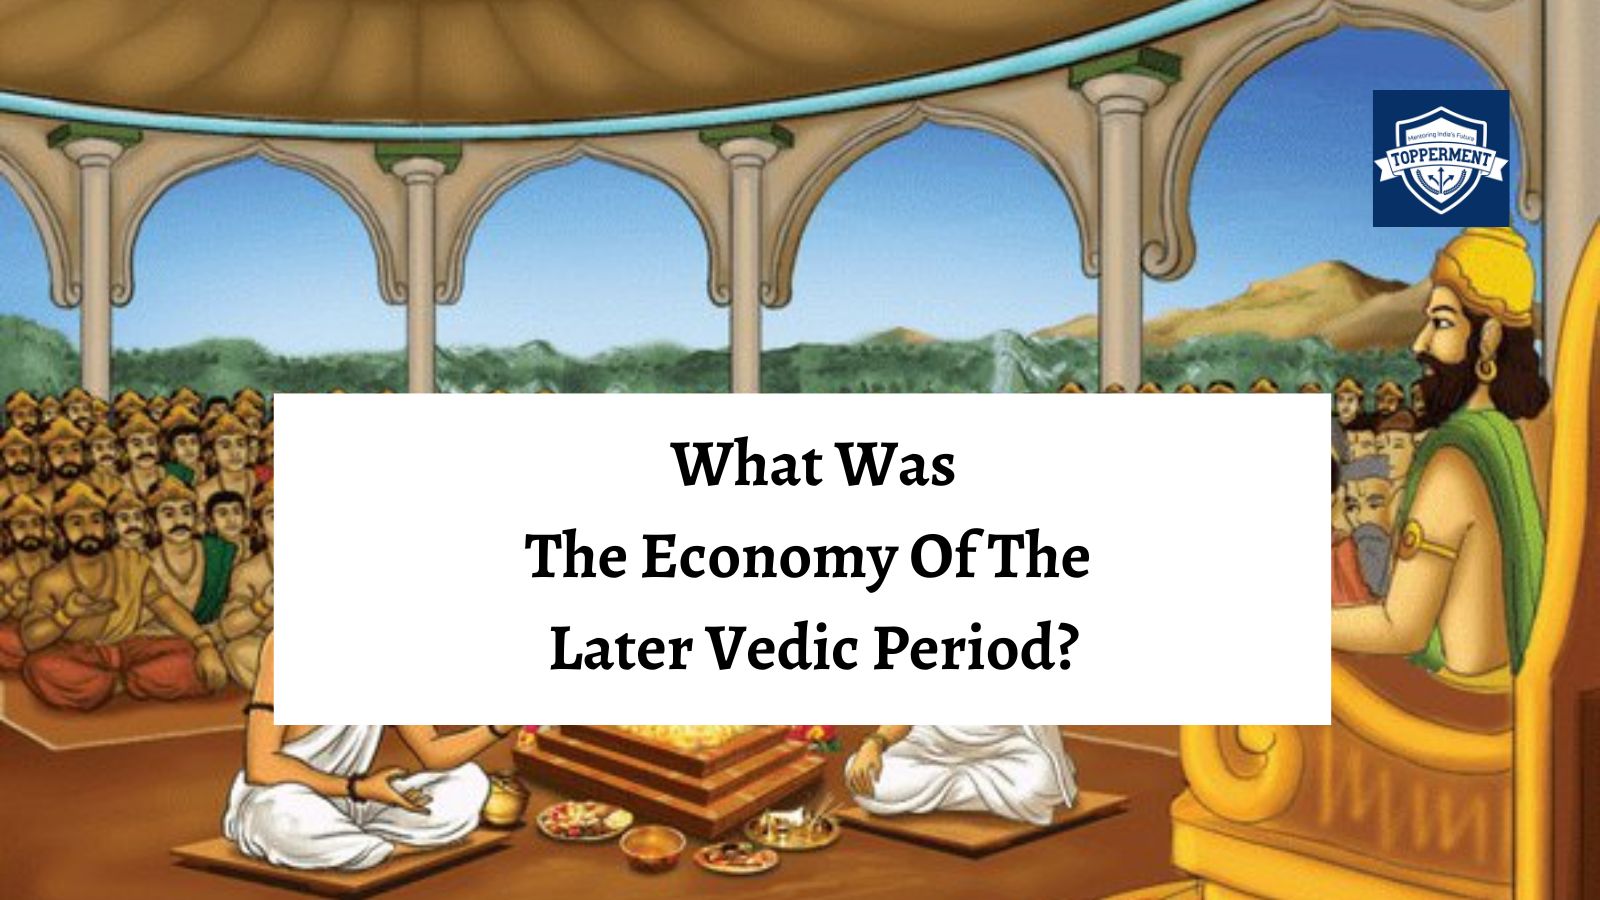 Economy In The Later Vedic Period | Best UPSC IAS Coaching For Mentorship And Guidance